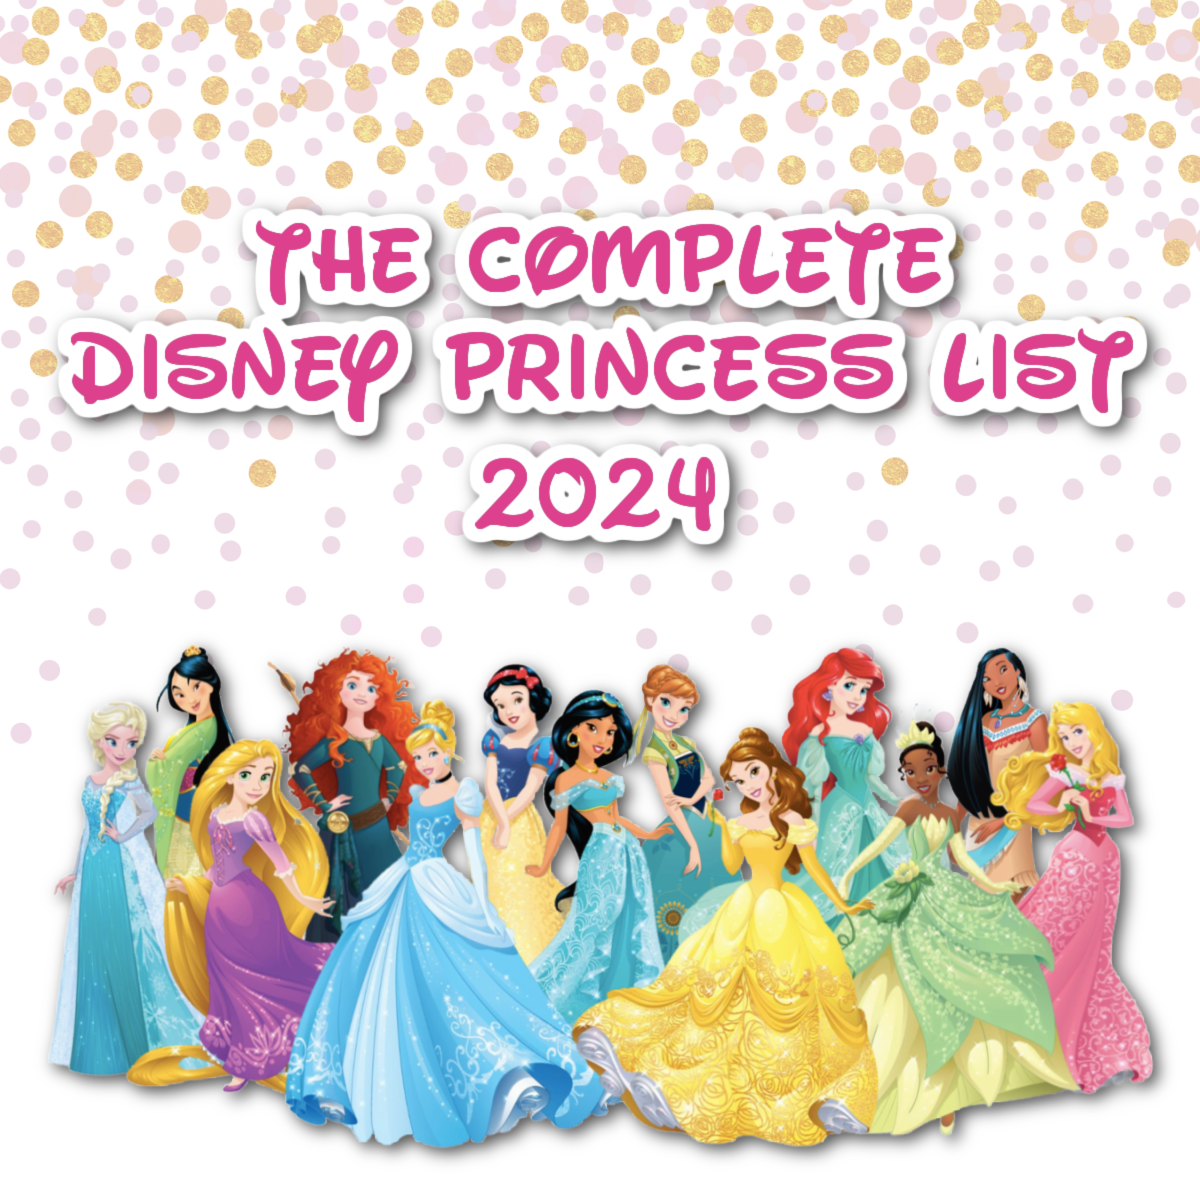 How Old Are the Disney Princesses?